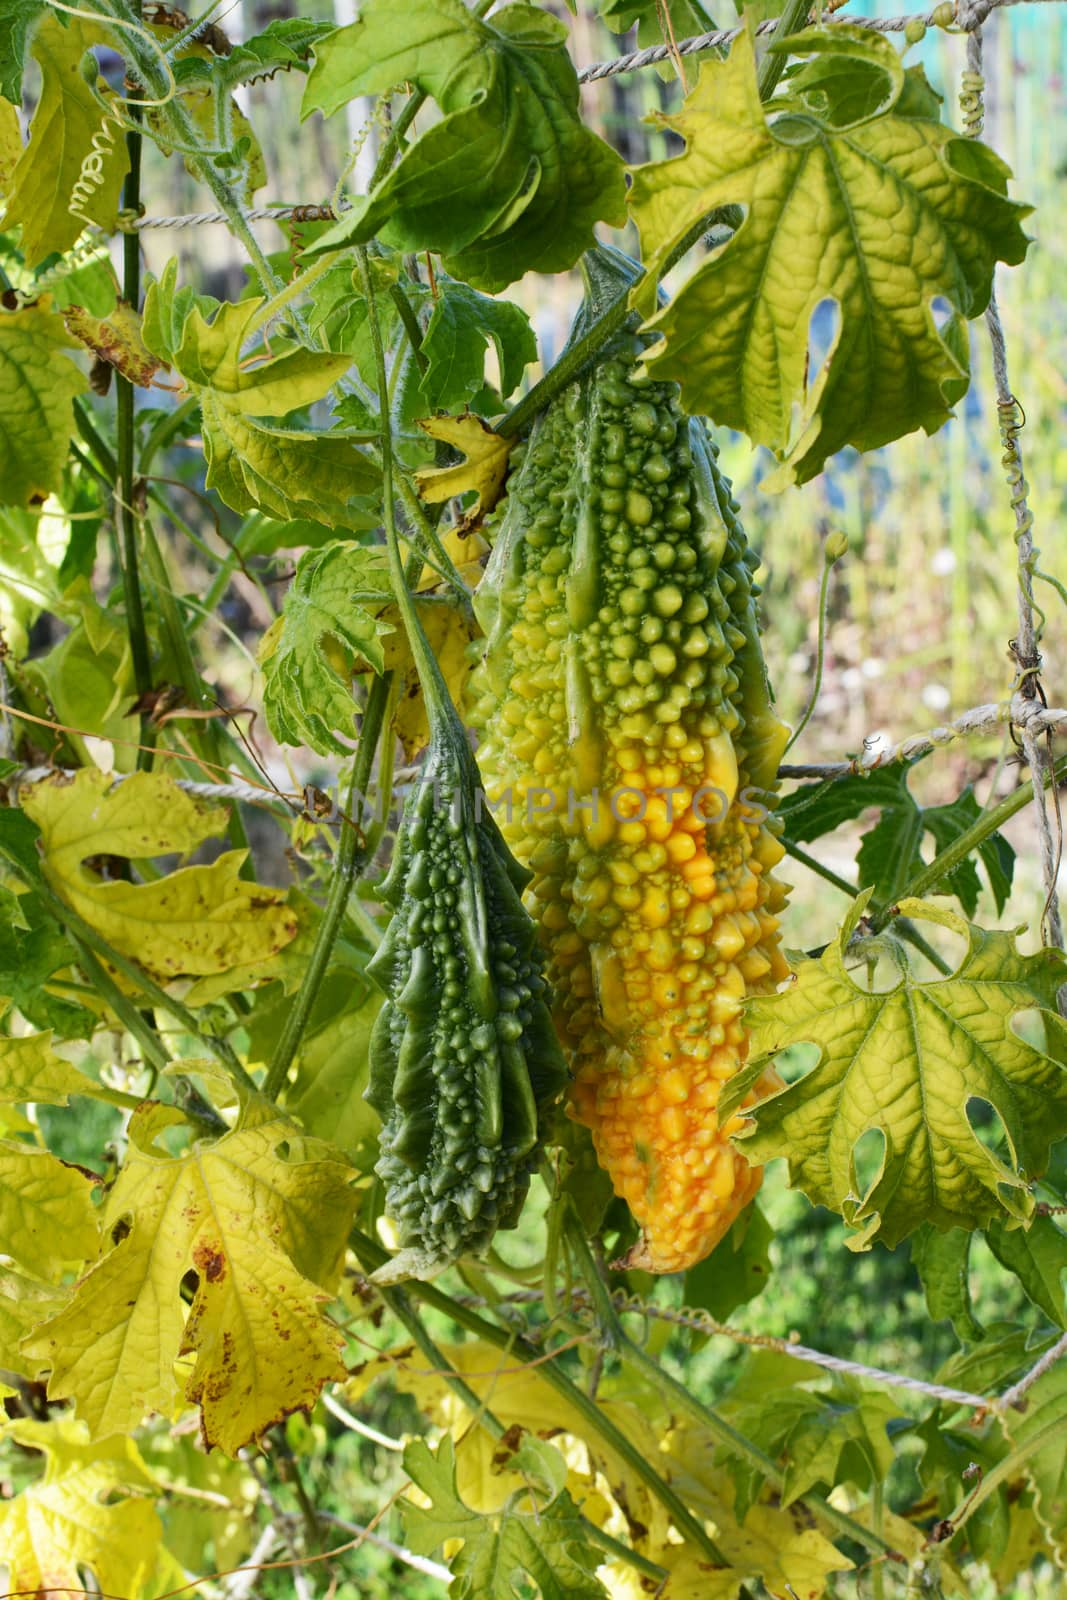 Large ripening bitter melon, turning yellow - growing on vine next to small green fruit